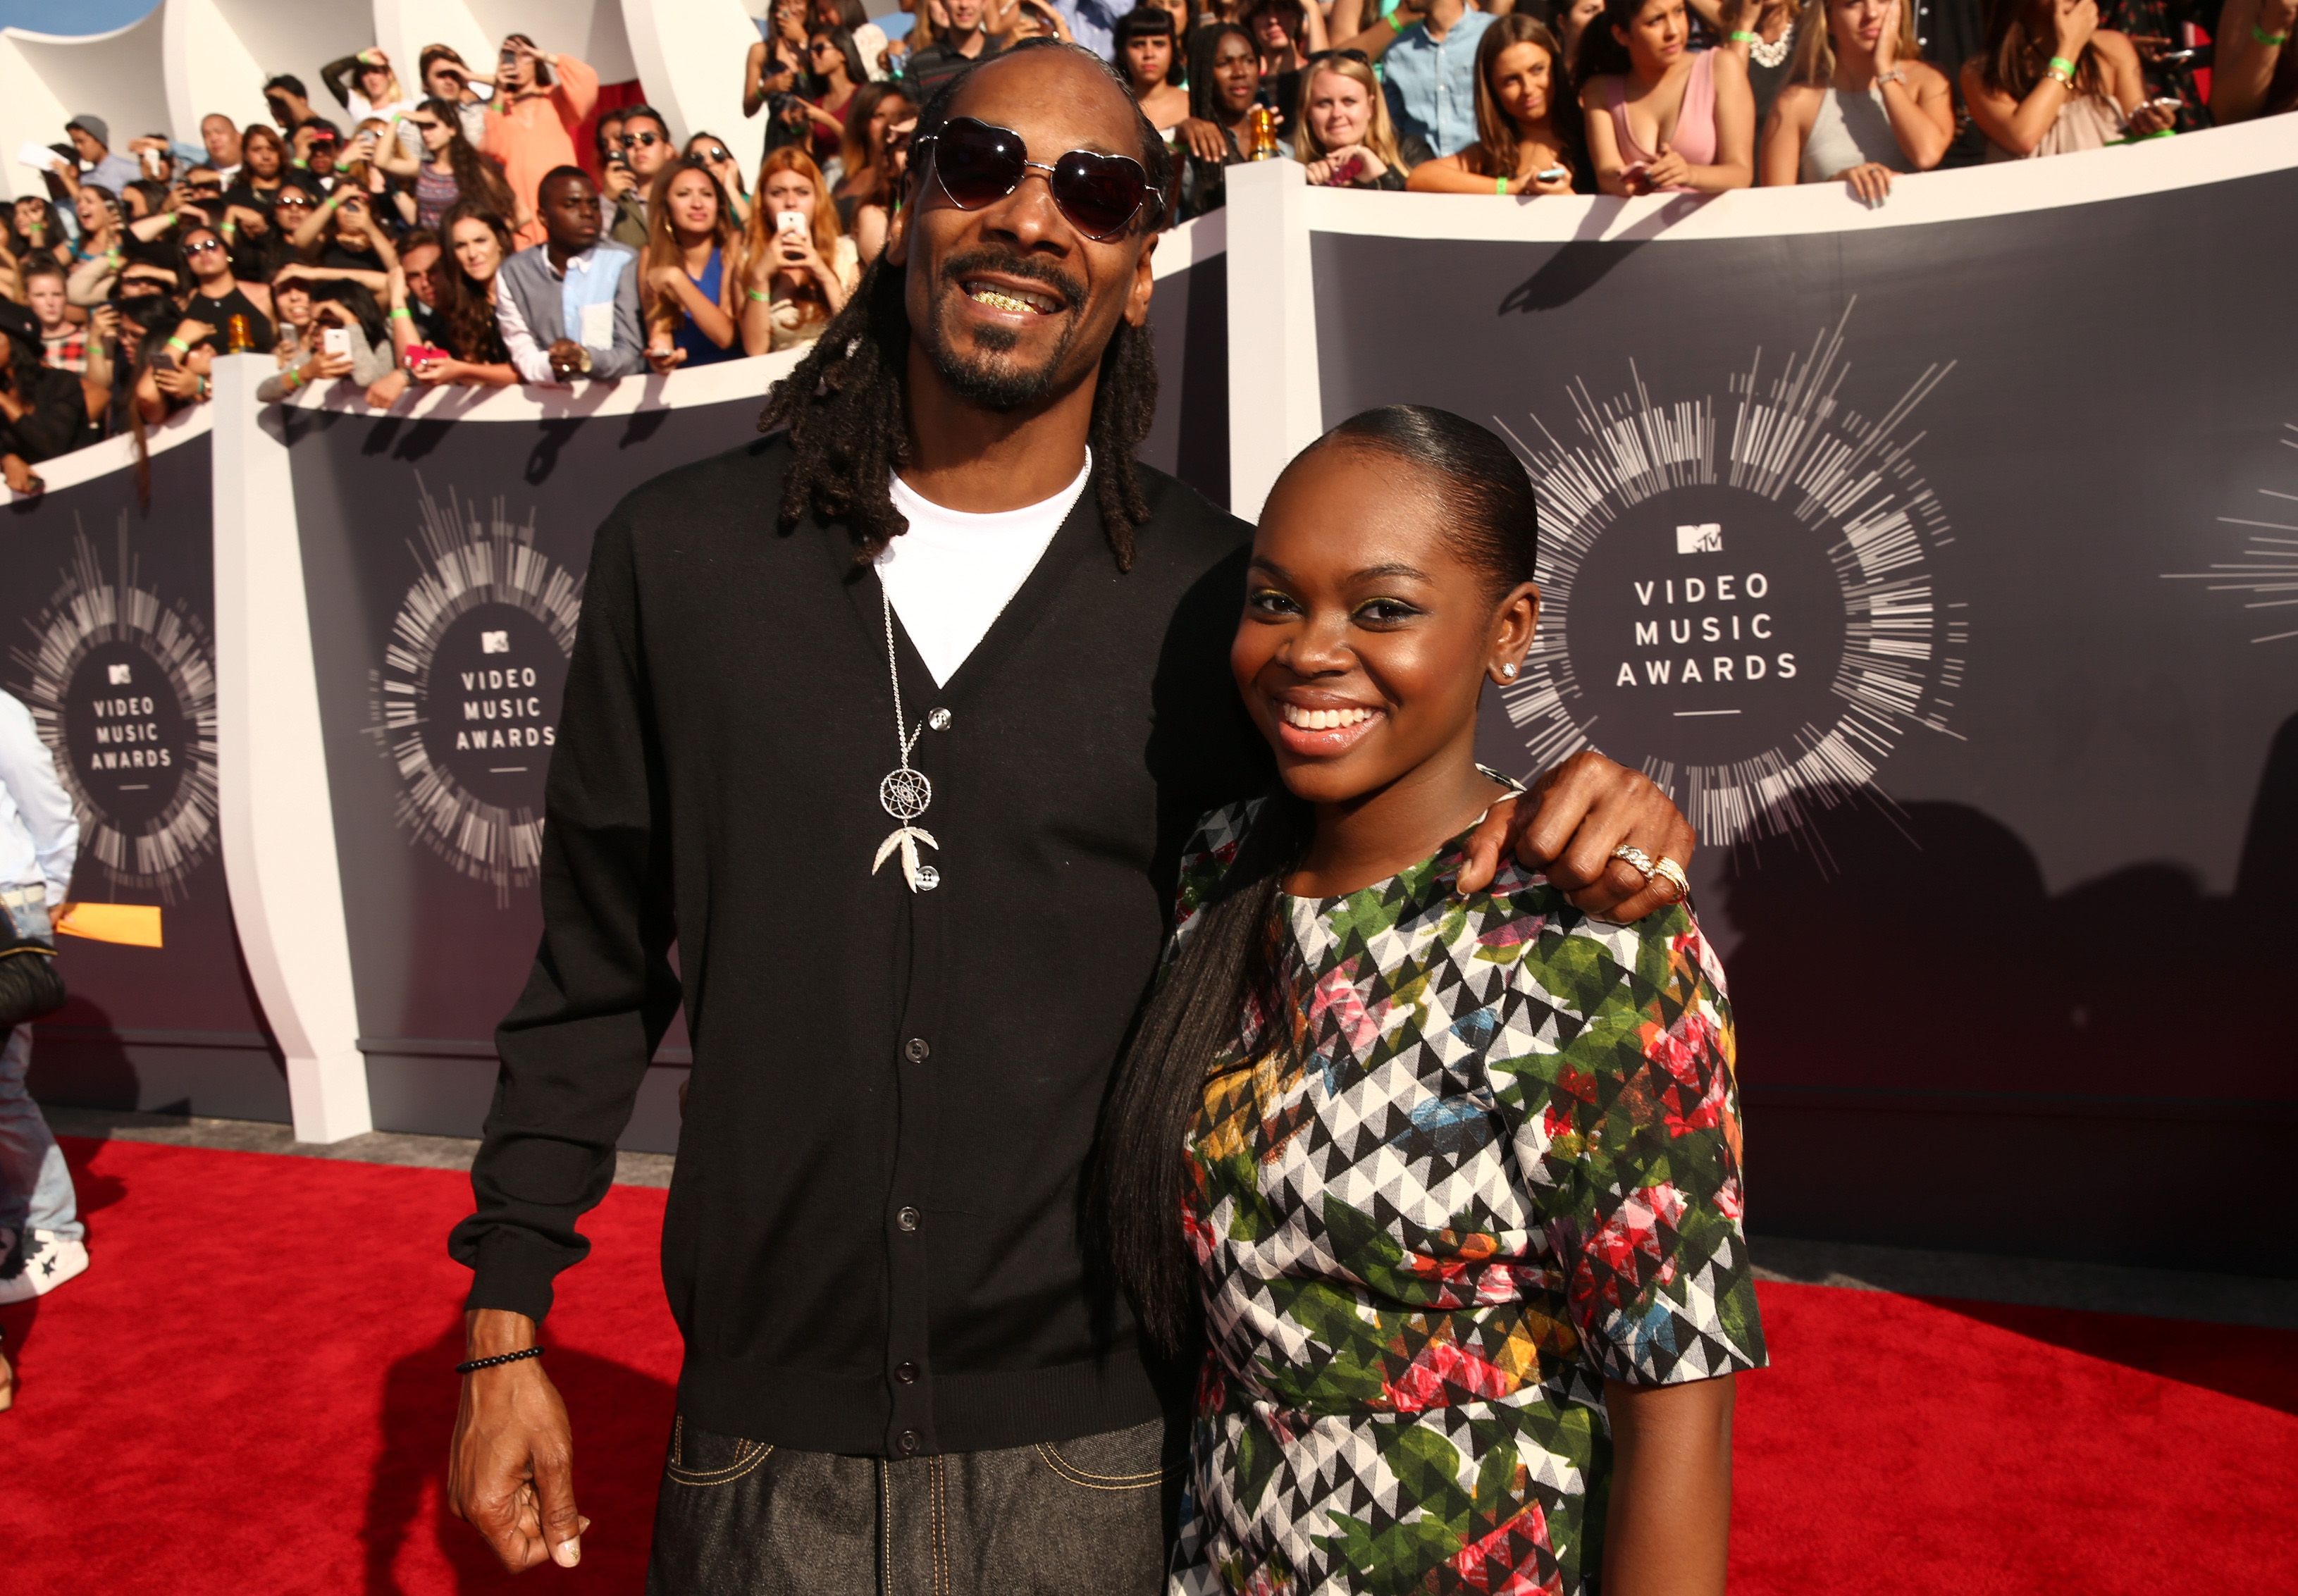 Snoop Dogg and Cori Broadus at the 2014 MTV Video Music Awards at The Forum in Inglewood, California | Photo: Christopher Polk/Getty Images for MTV